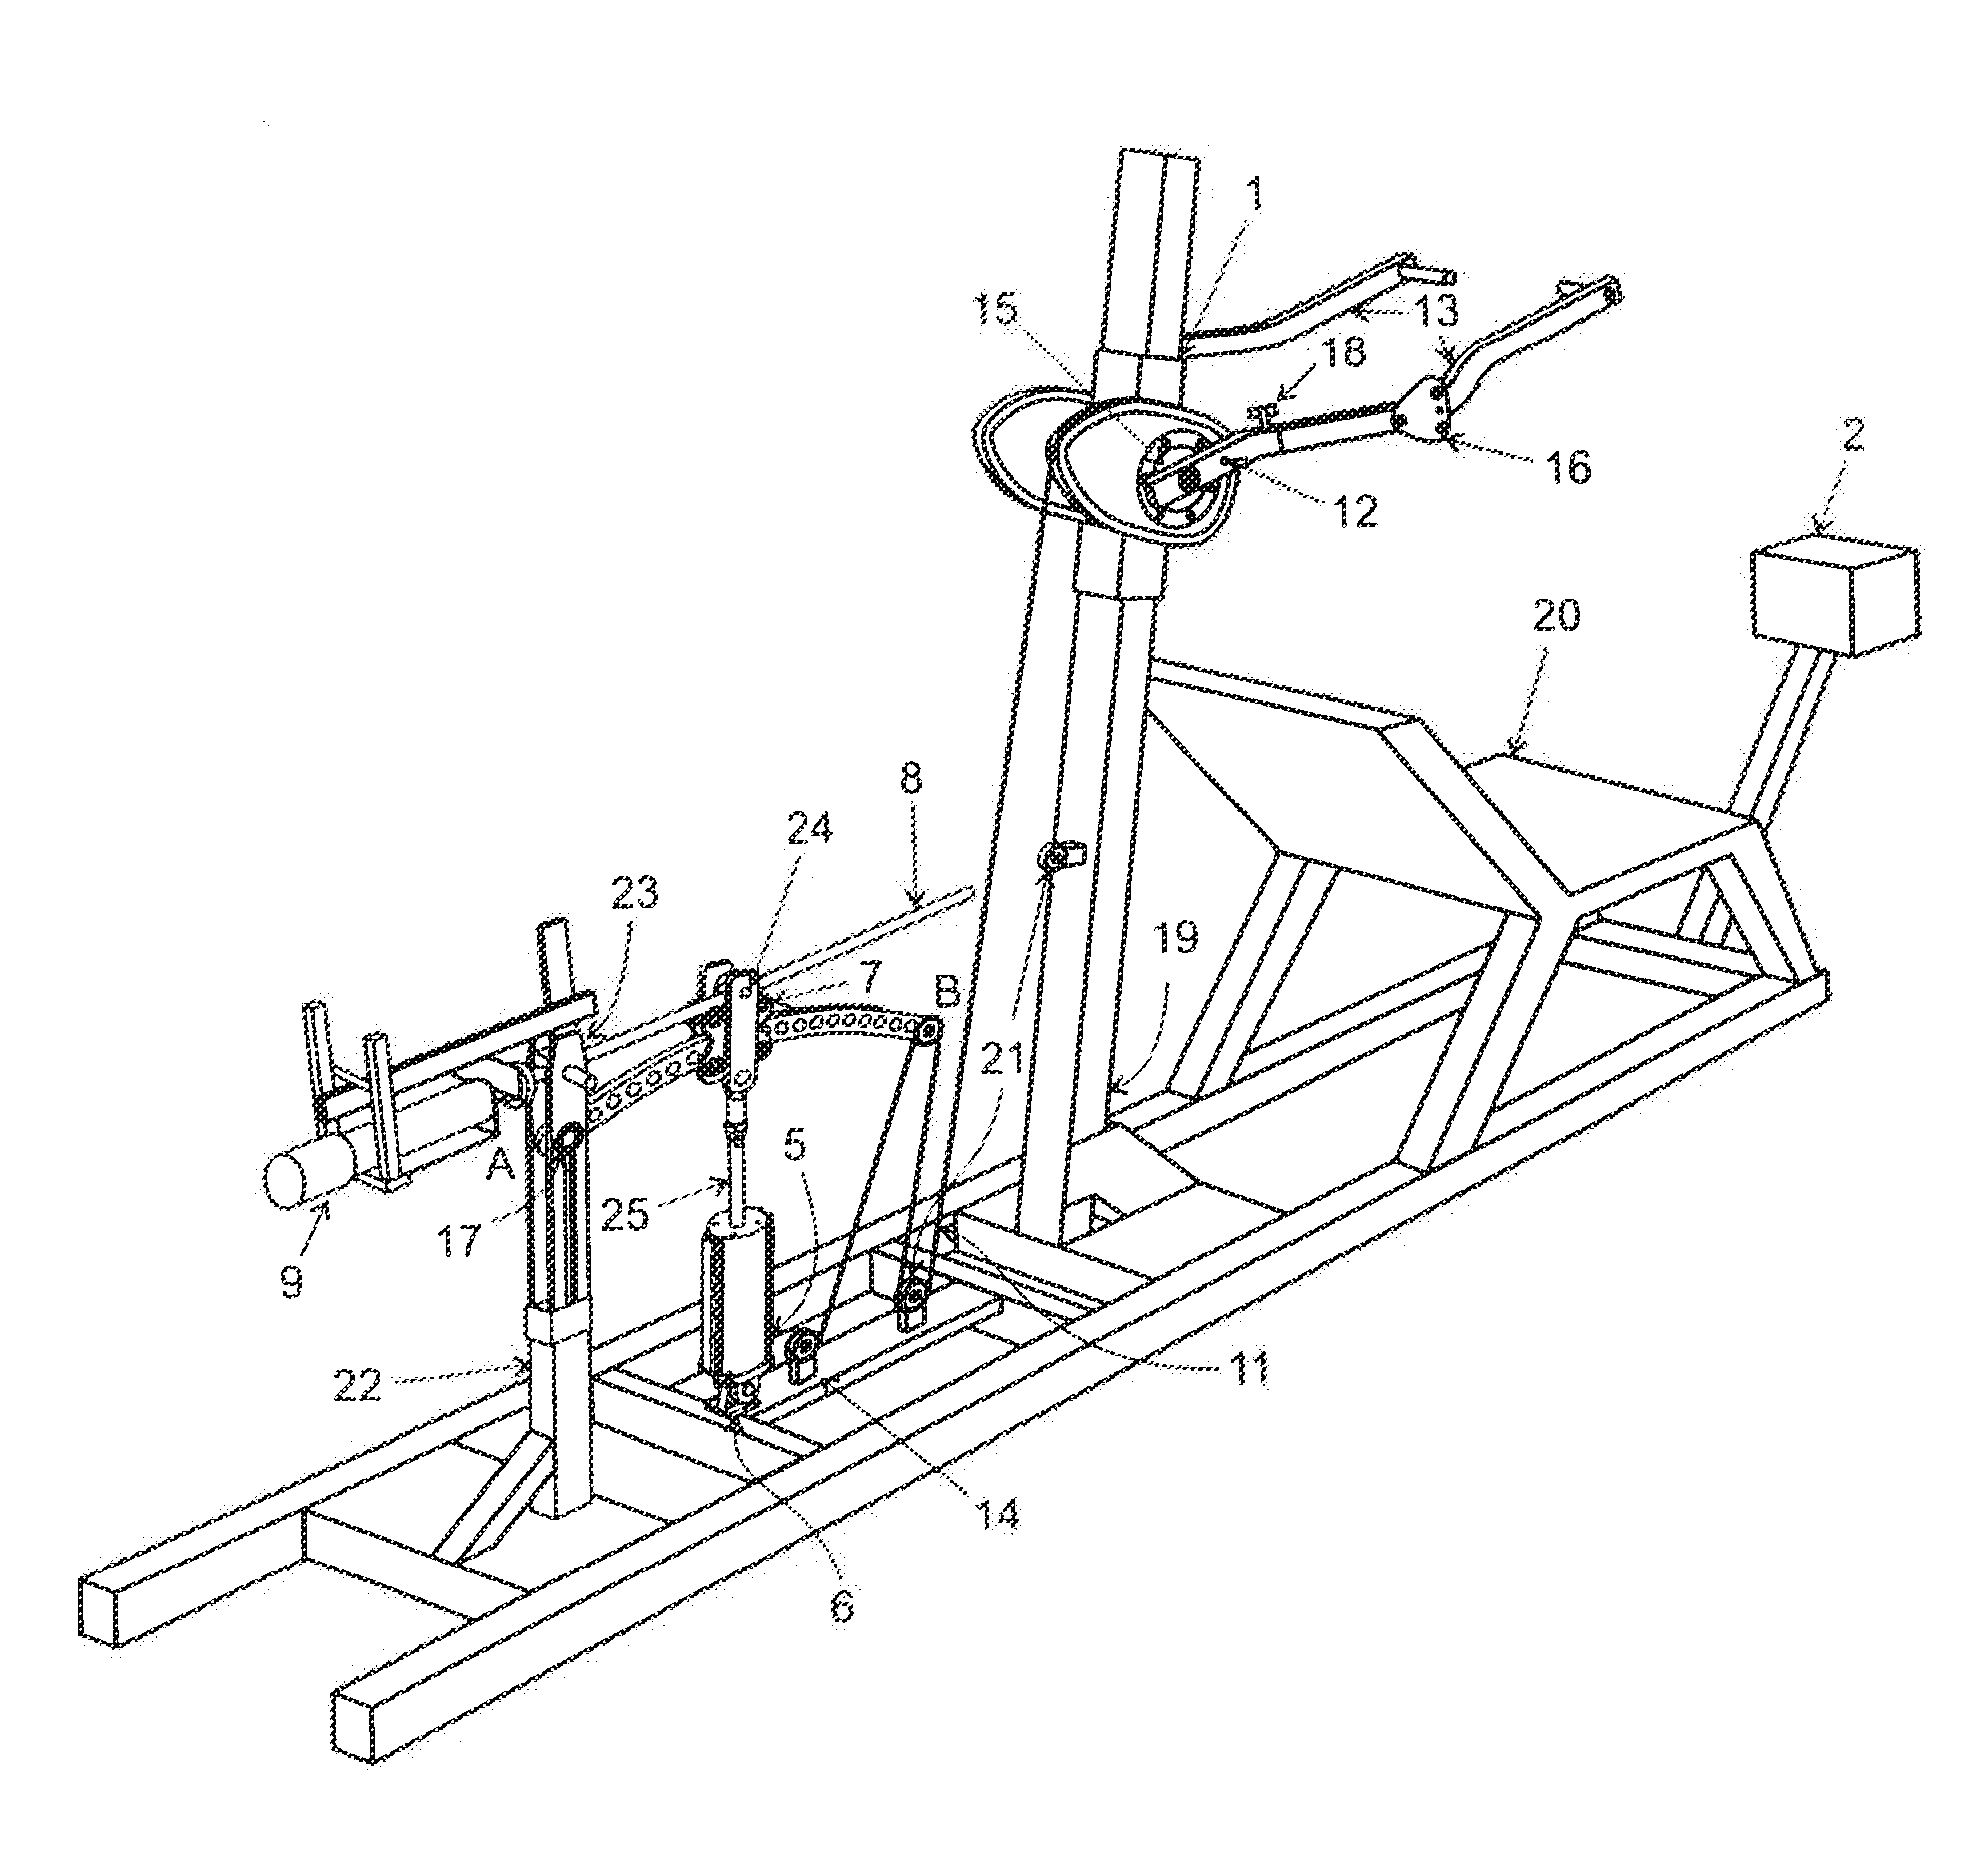 Resisting system for making variable mechanical resistance exercises